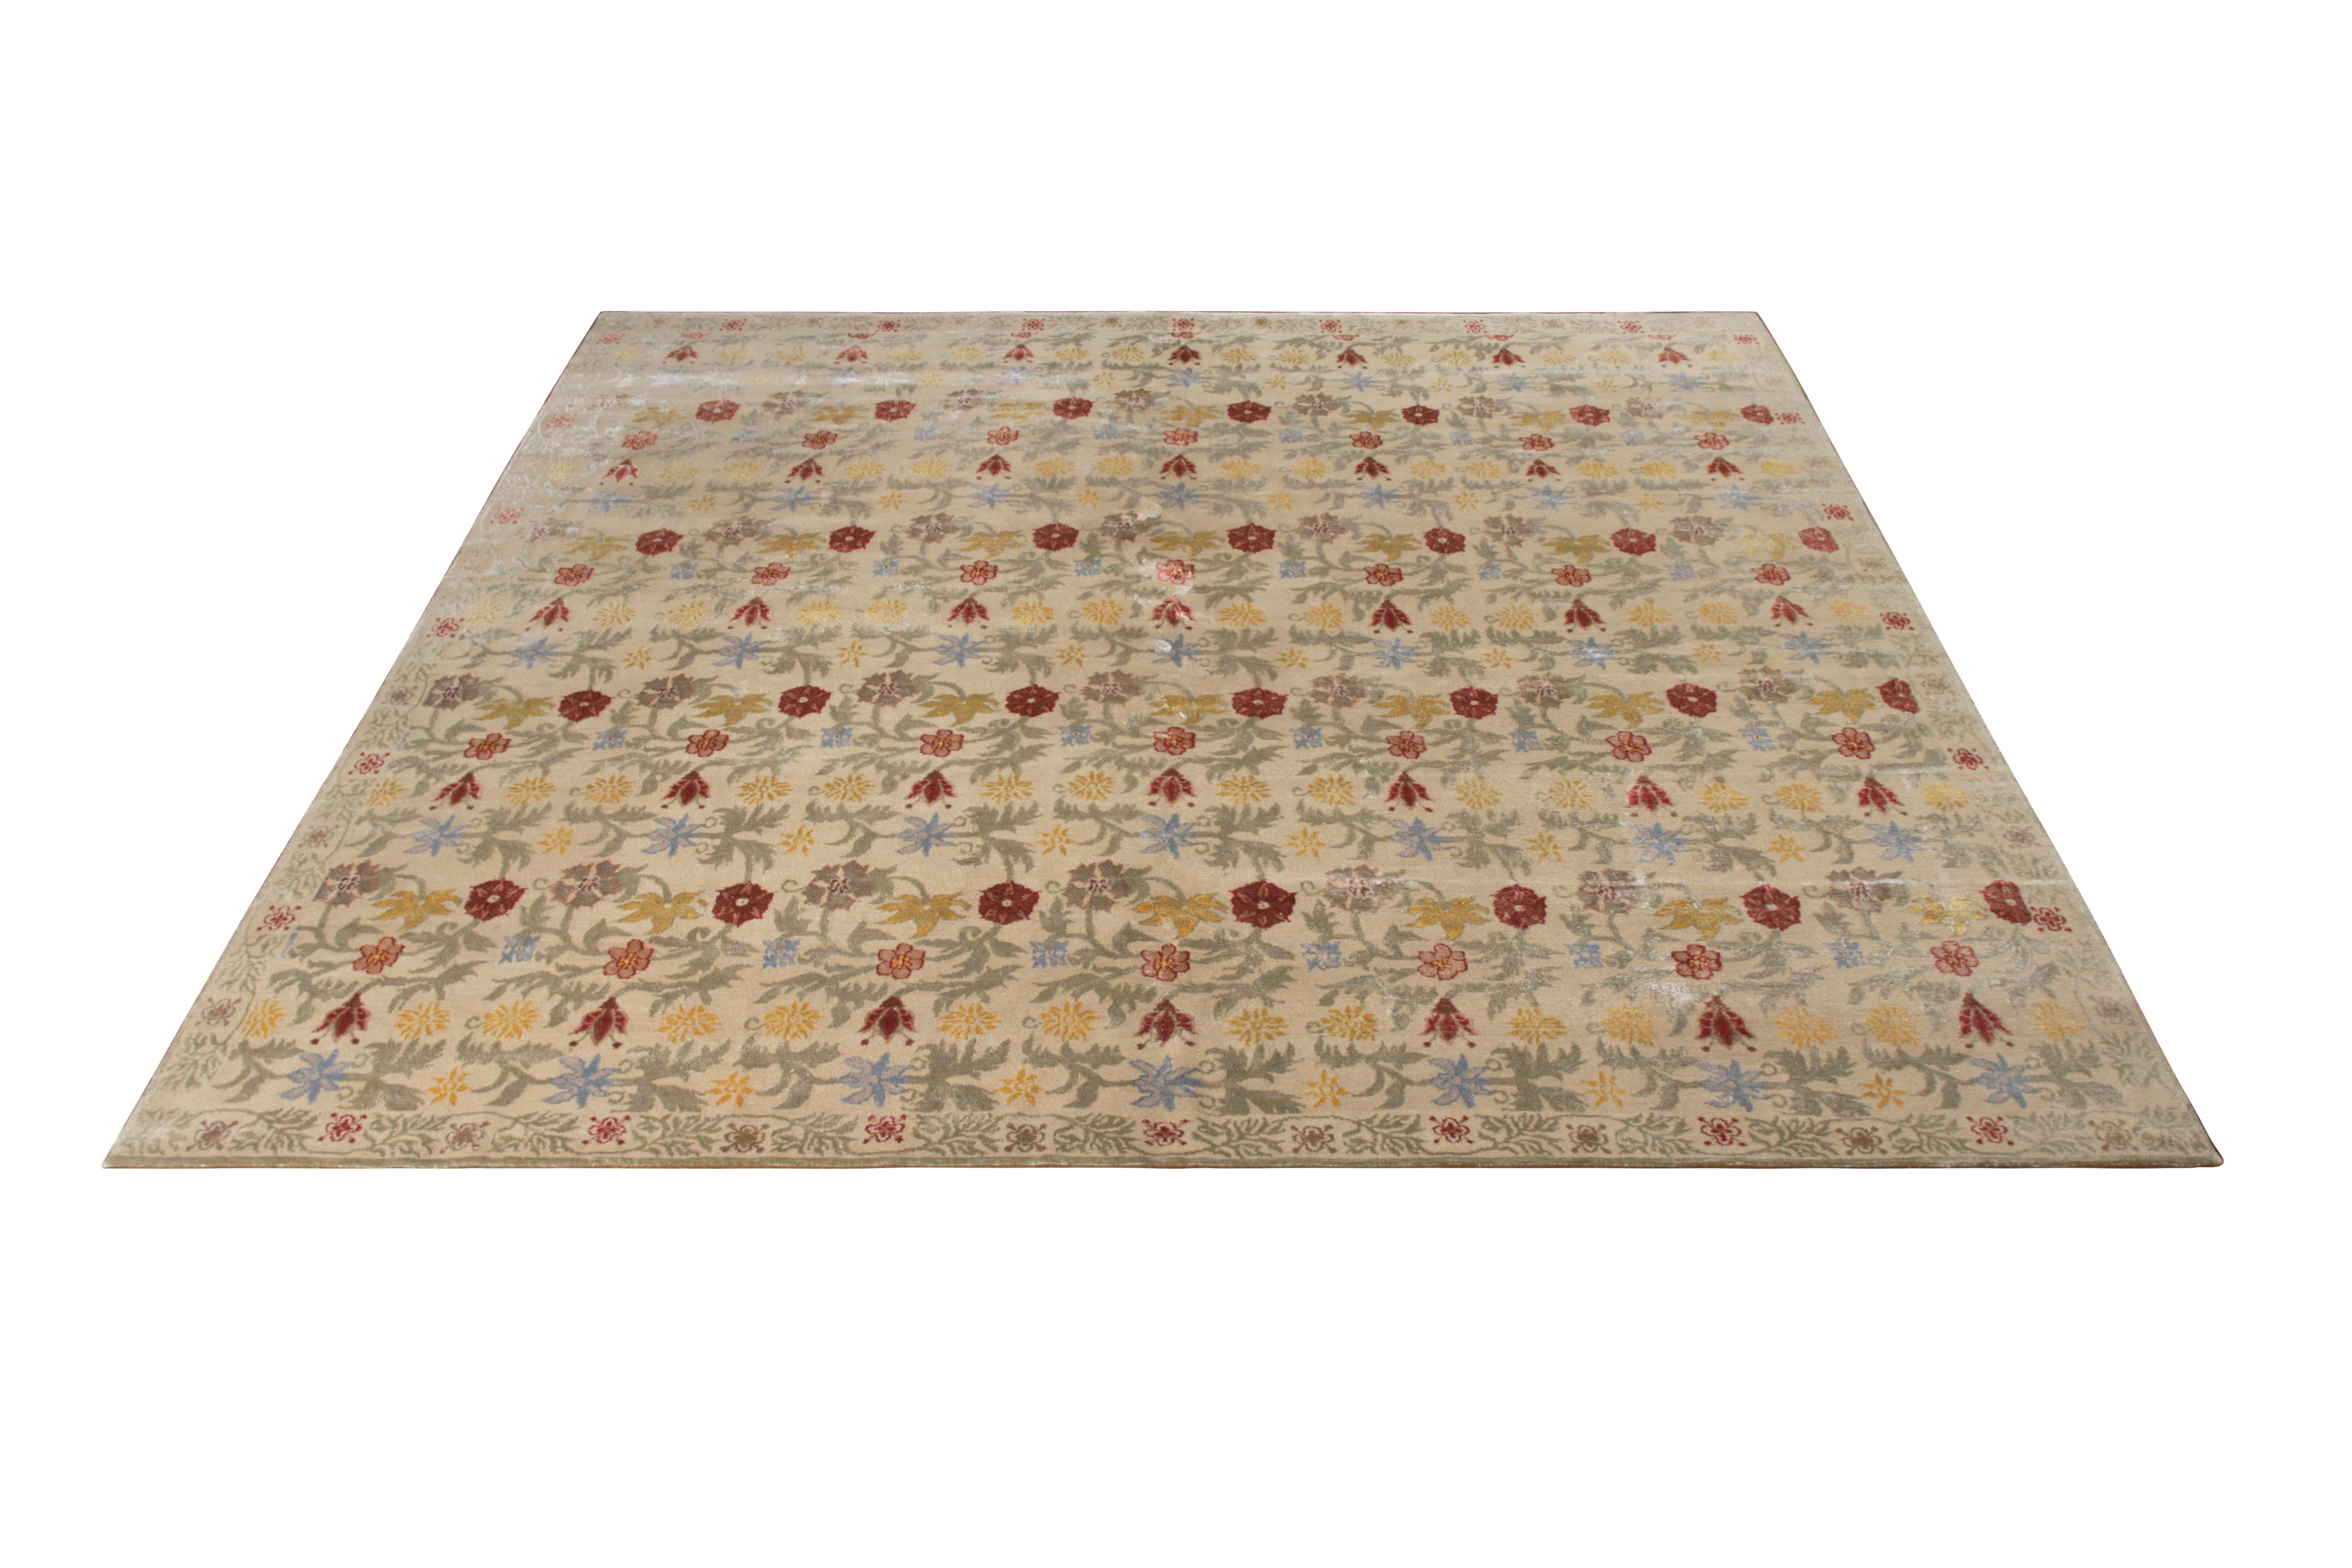 Hand knotted in all-natural silk and wool, this 8x10 transitional rug is an addition to the European rug collection by Rug & Kilim, affectionately dubbed “Bilbao” for the Spanish rug style of inspiration in this square rug’s gold-green and the red